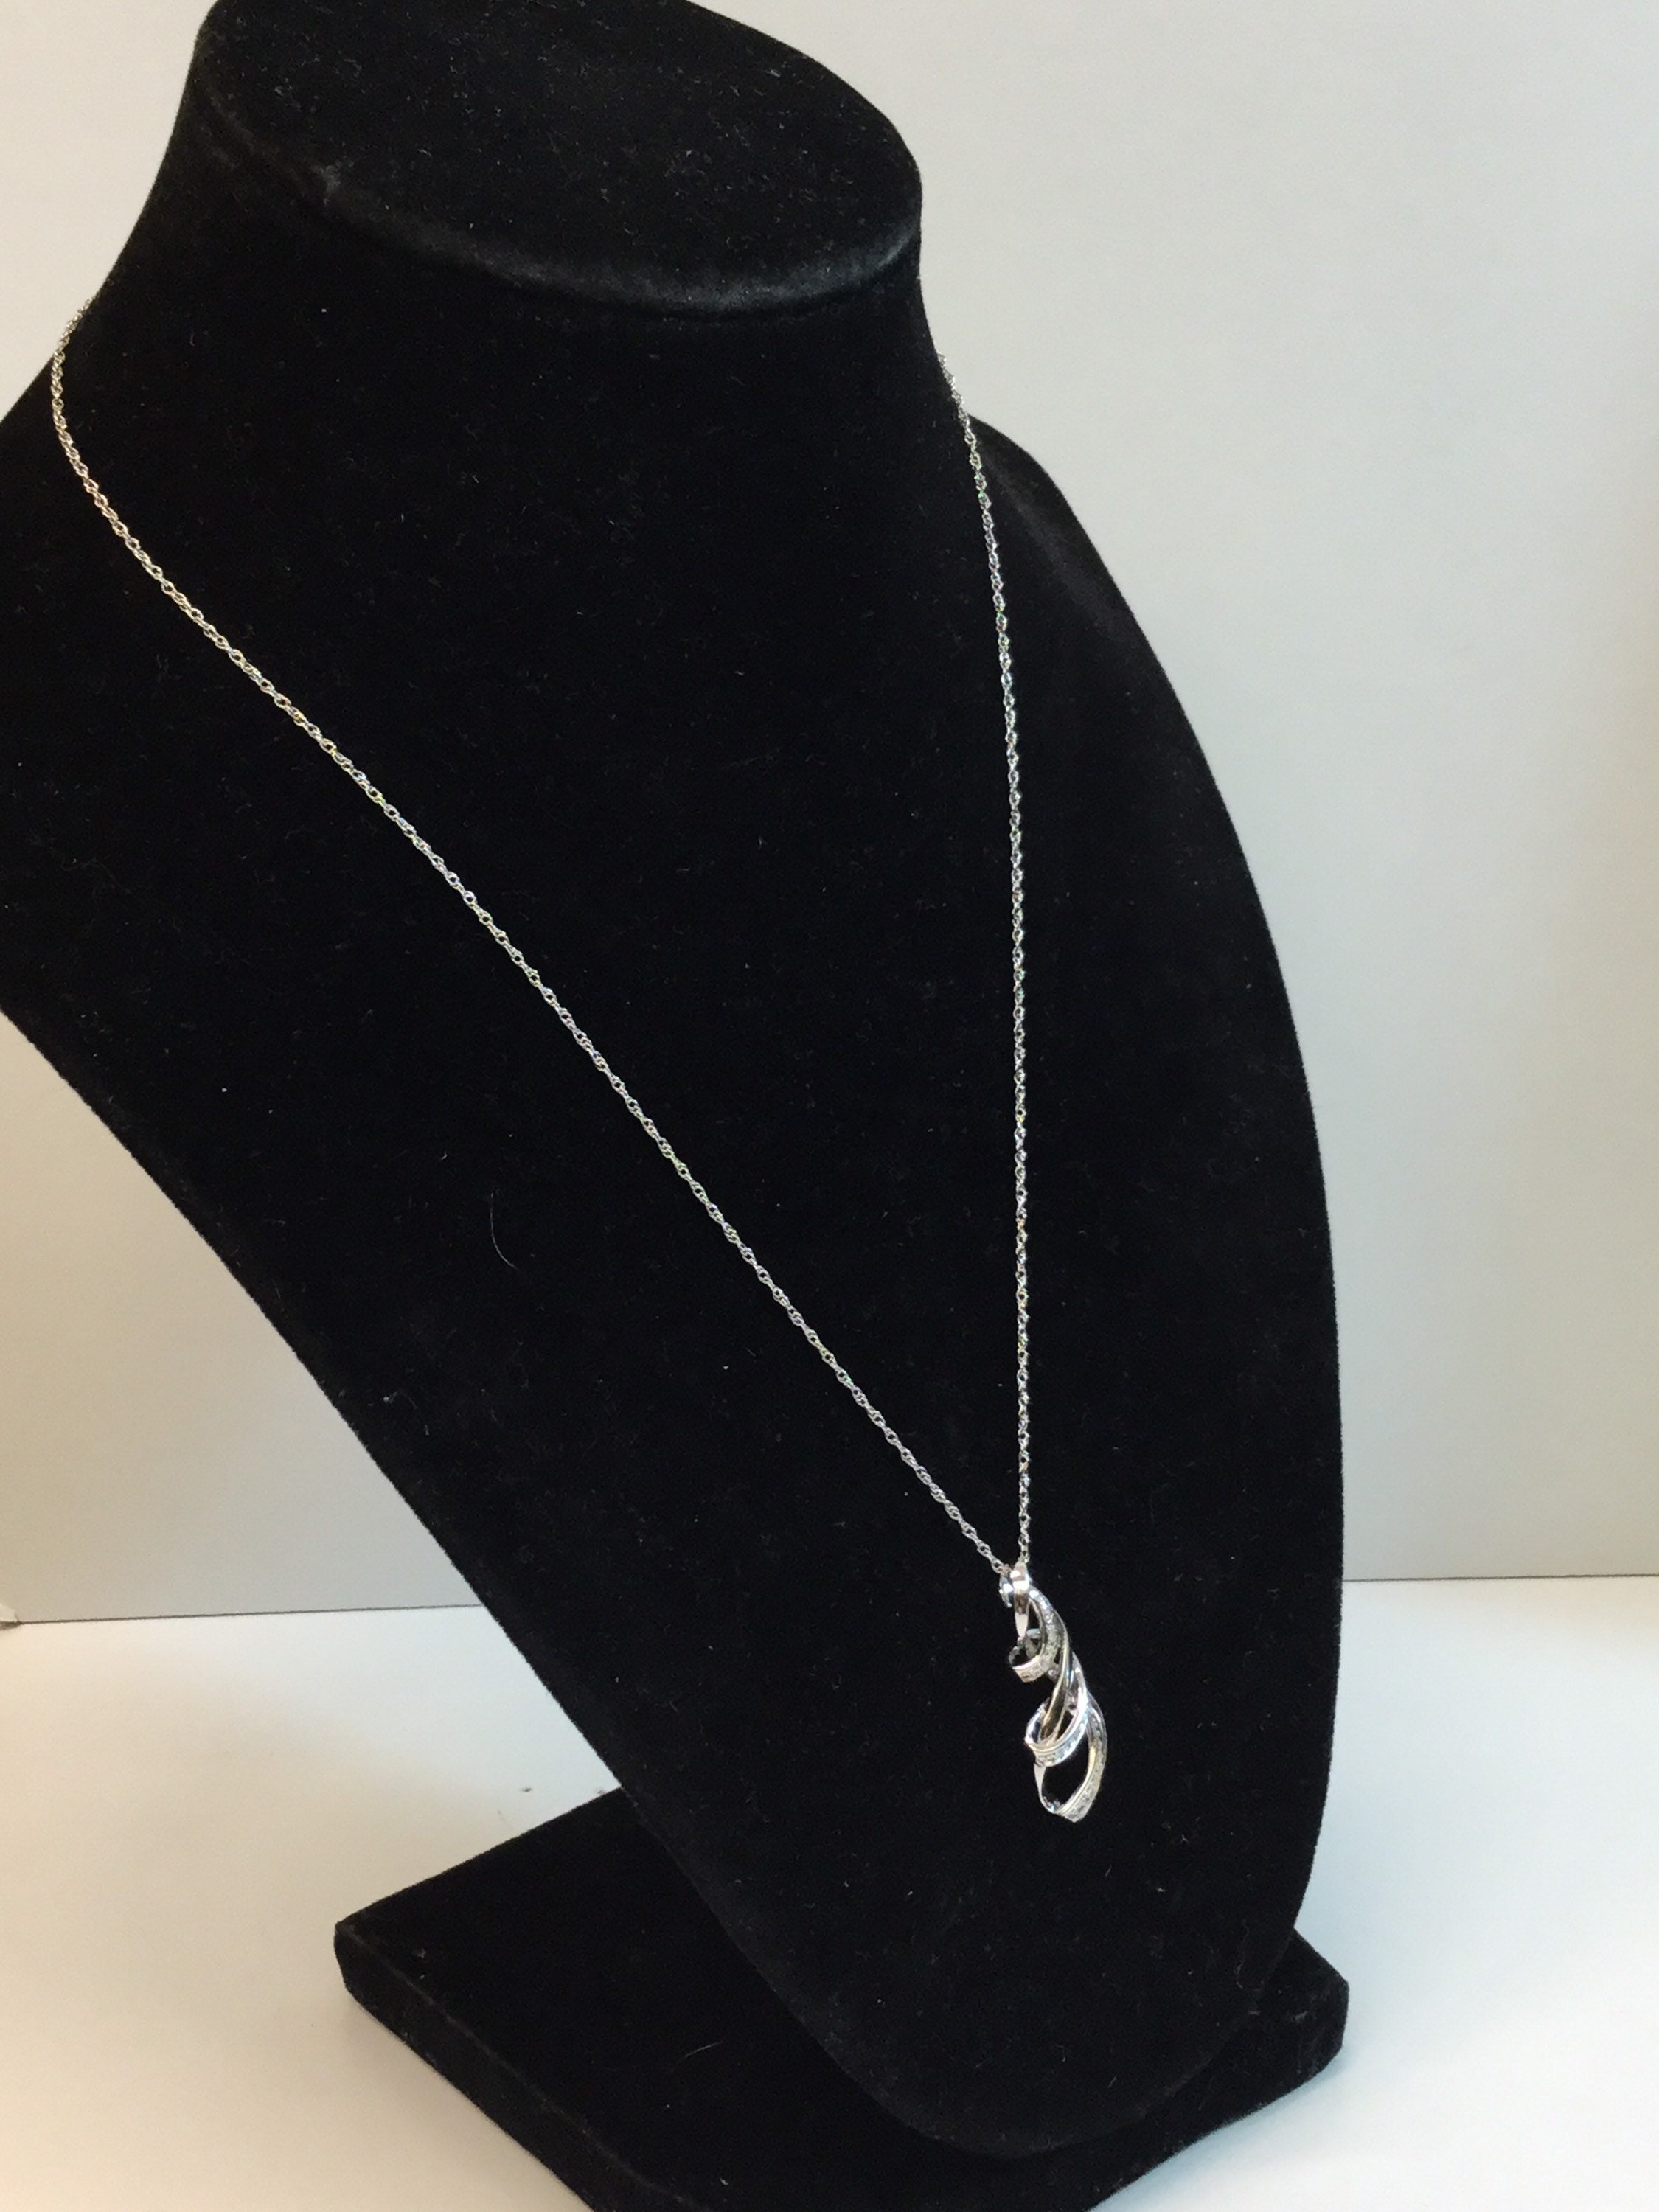 Vintage Sterling Silver Chain Necklace With Spiral Diamond - Etsy